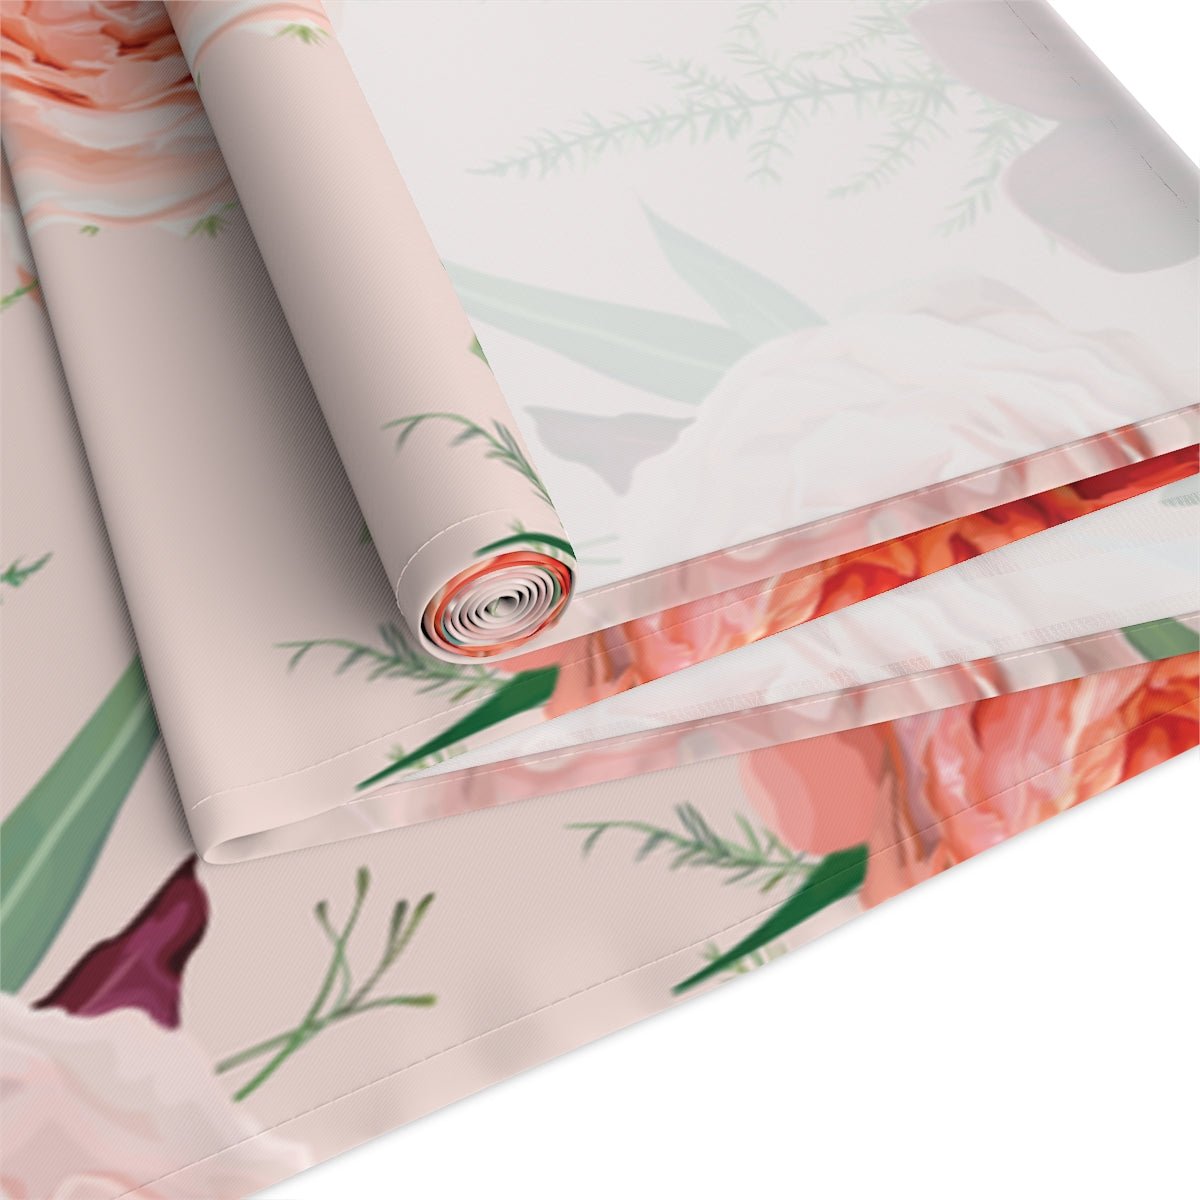 Blush Roses Table Runner - Puffin Lime